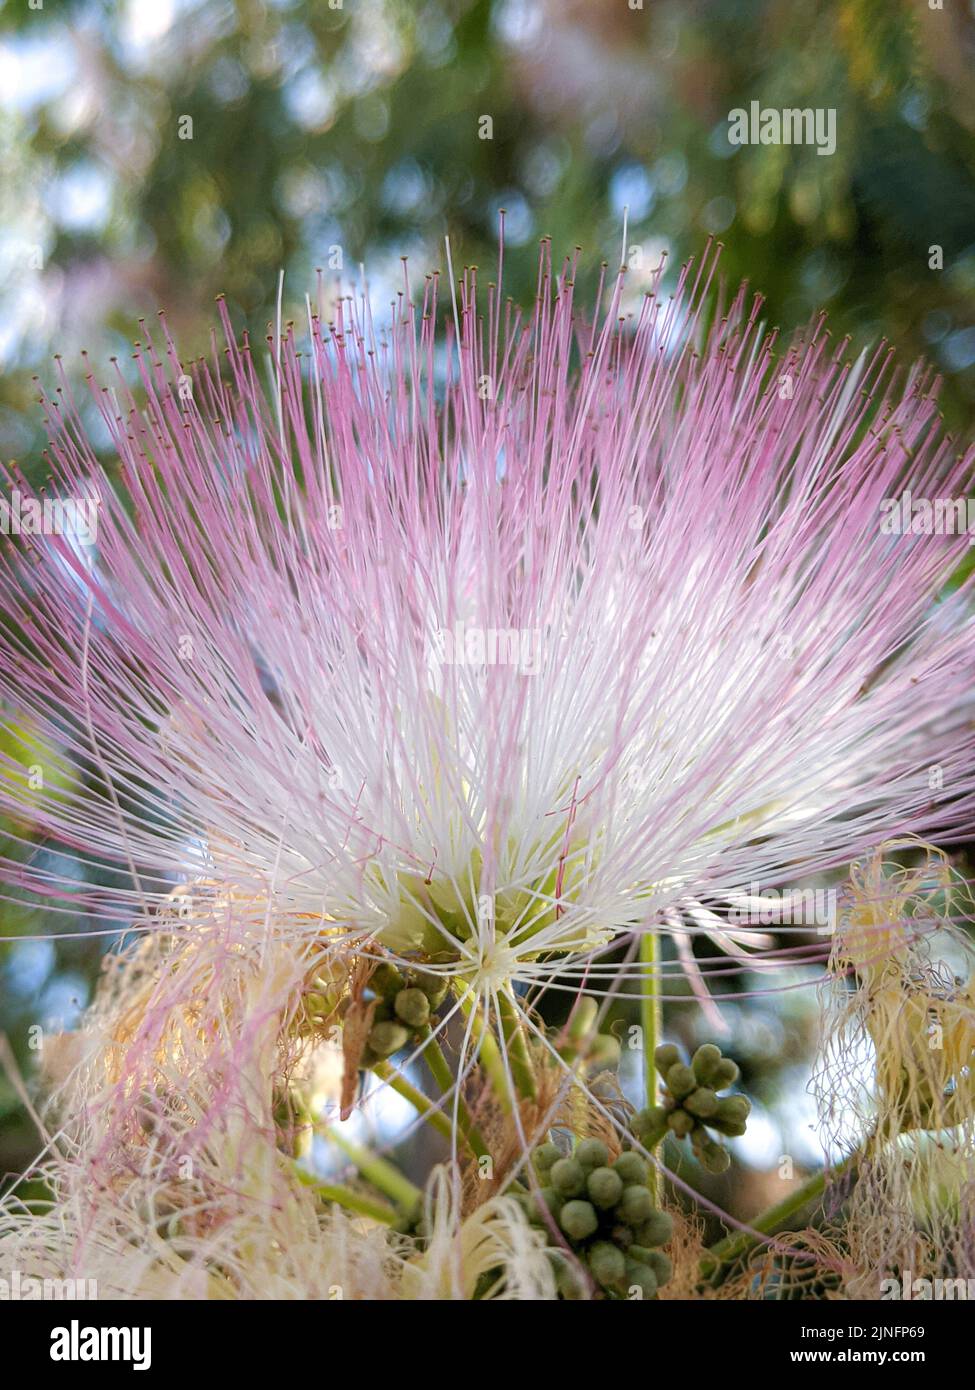 Fluffy flower heads of Albizia julibrissin or pink silk tree Stock Photo